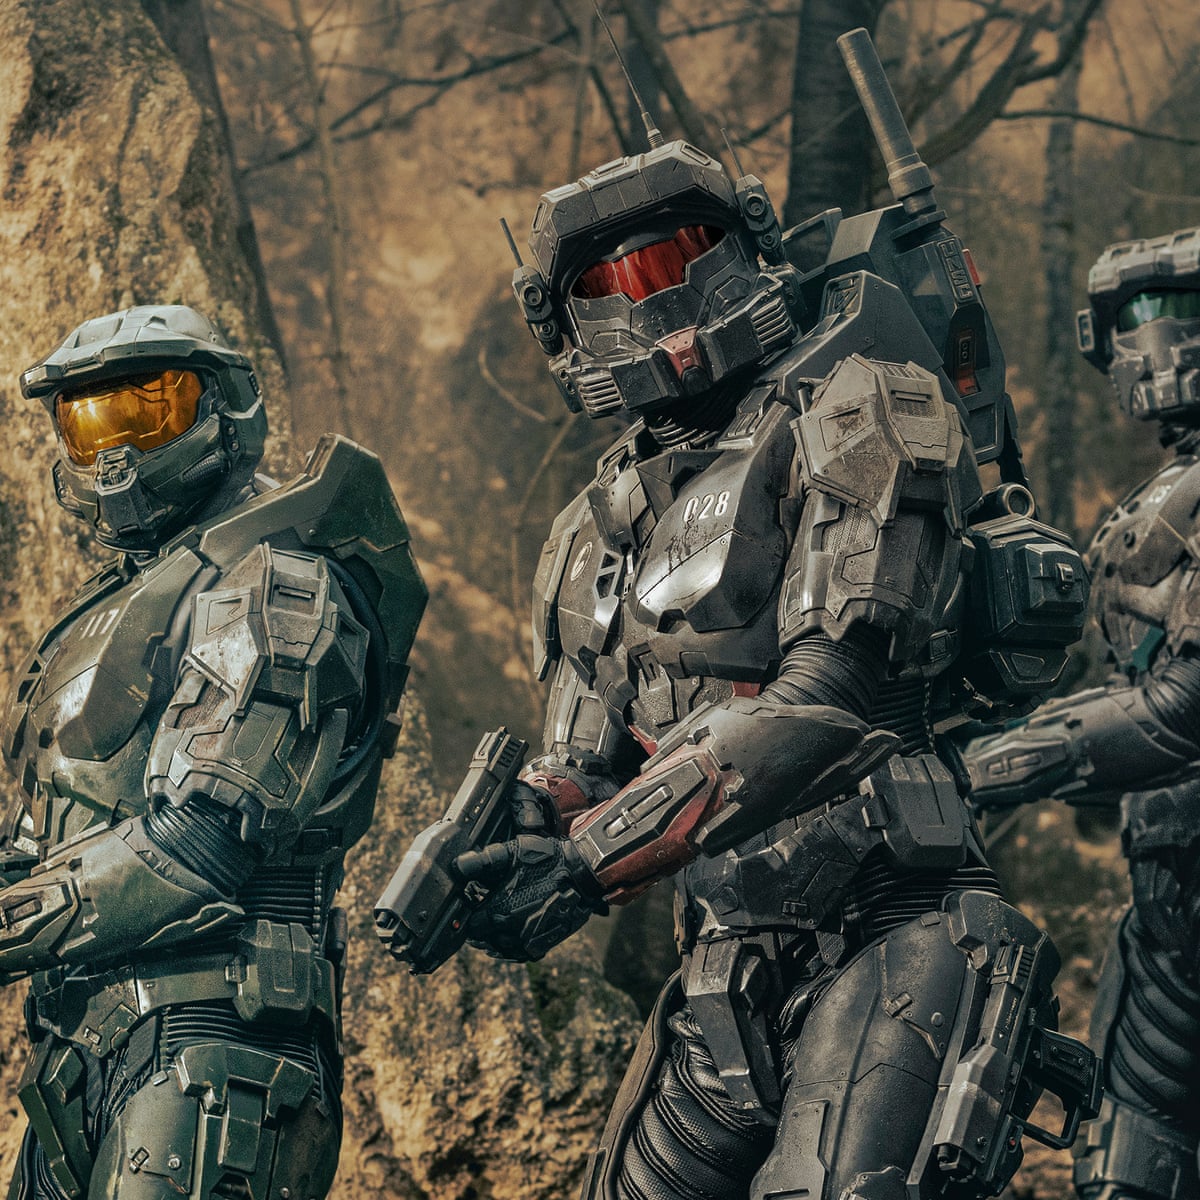 Halo review – fails to be TV's first great video game adaptation, Television & radio